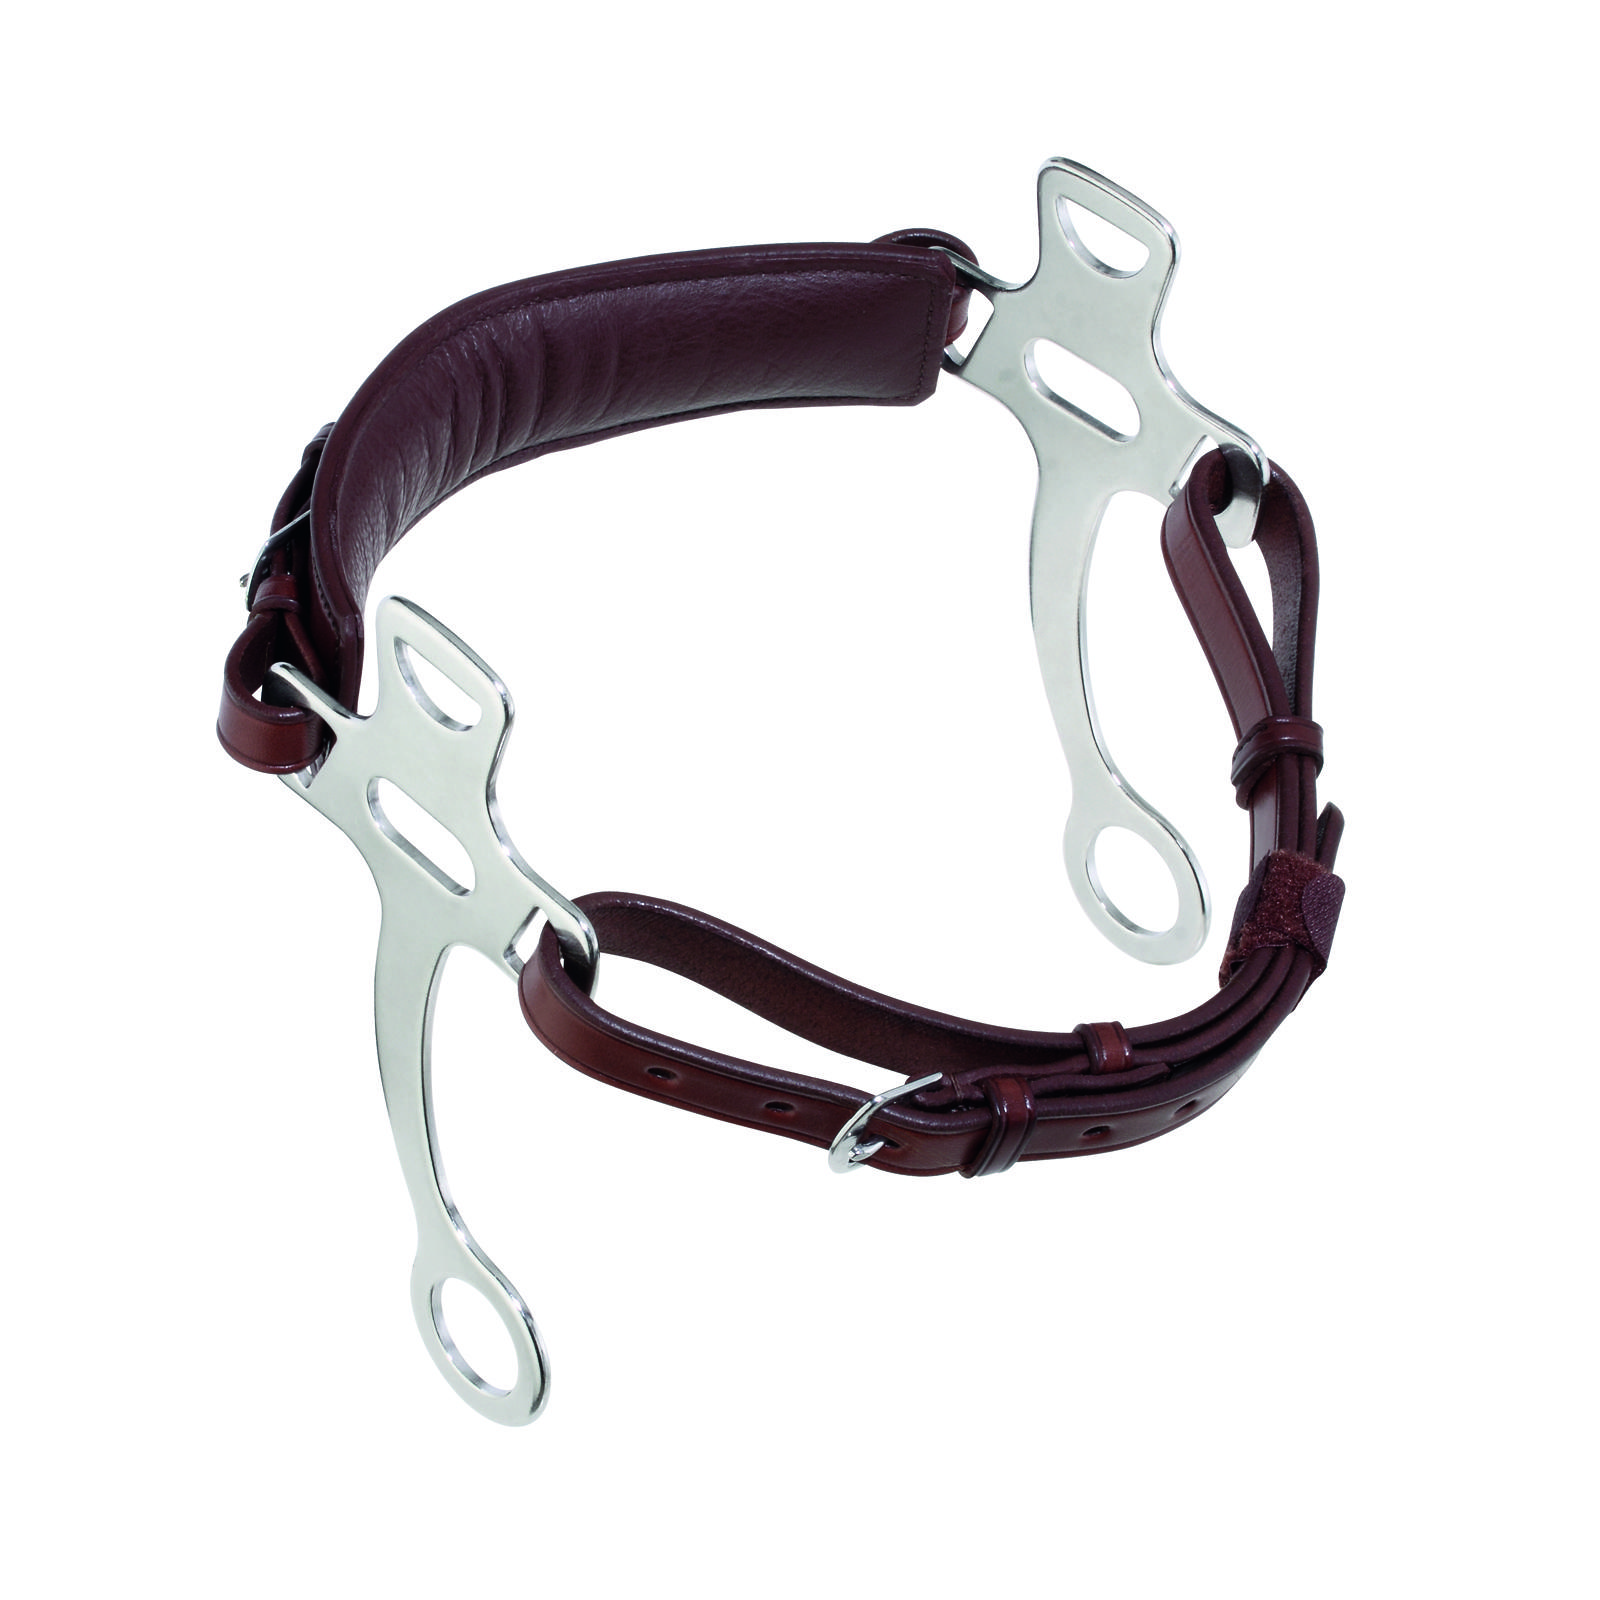 Foto Sprenger Pony-Hackamore with leather curb strap foto 966474